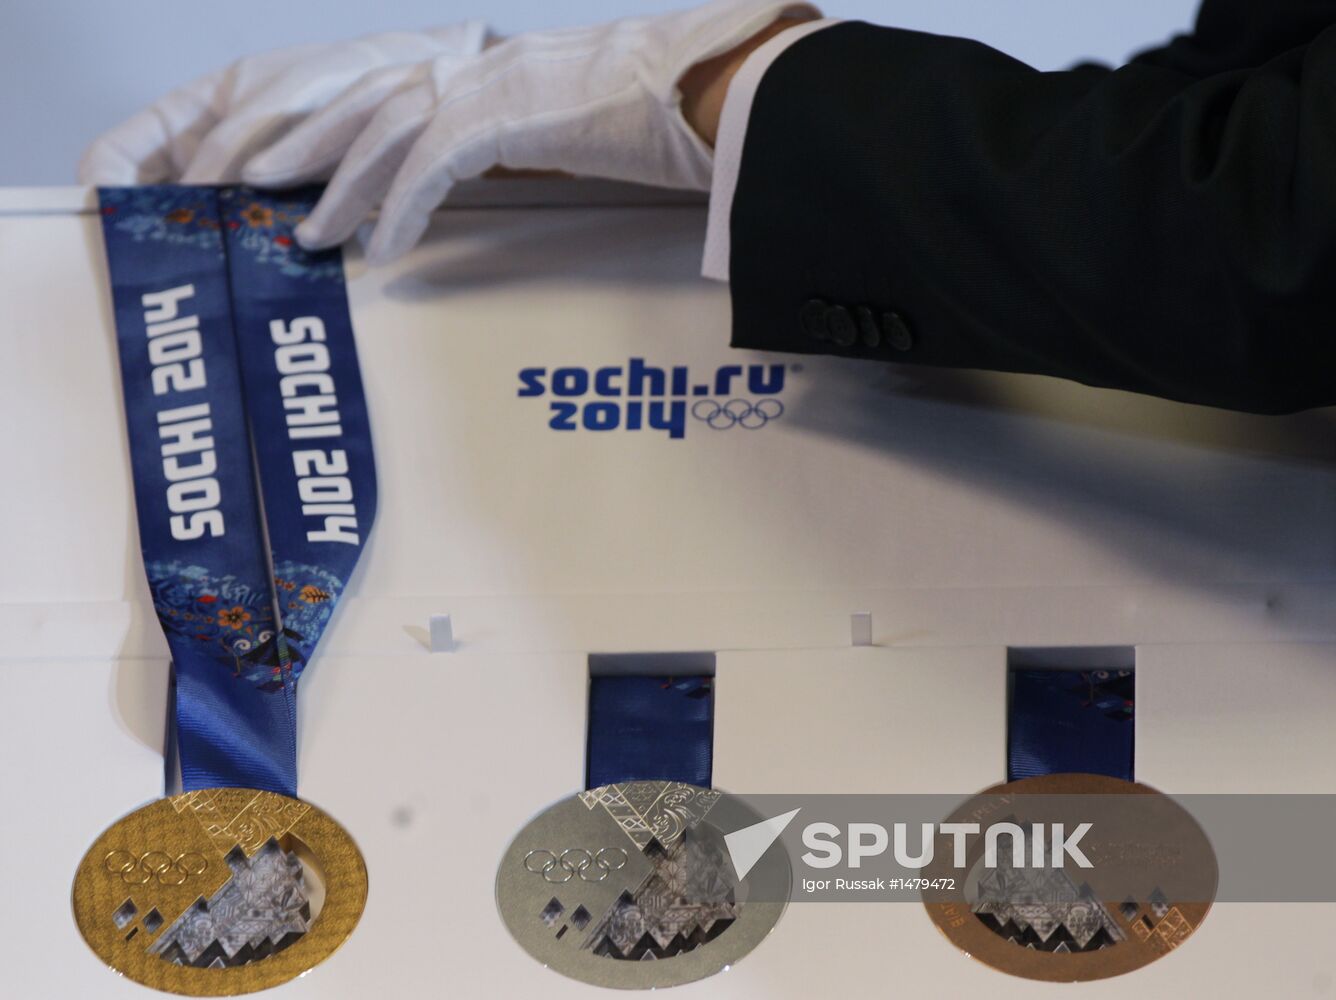 2014 Winter Olympics medals unveiled